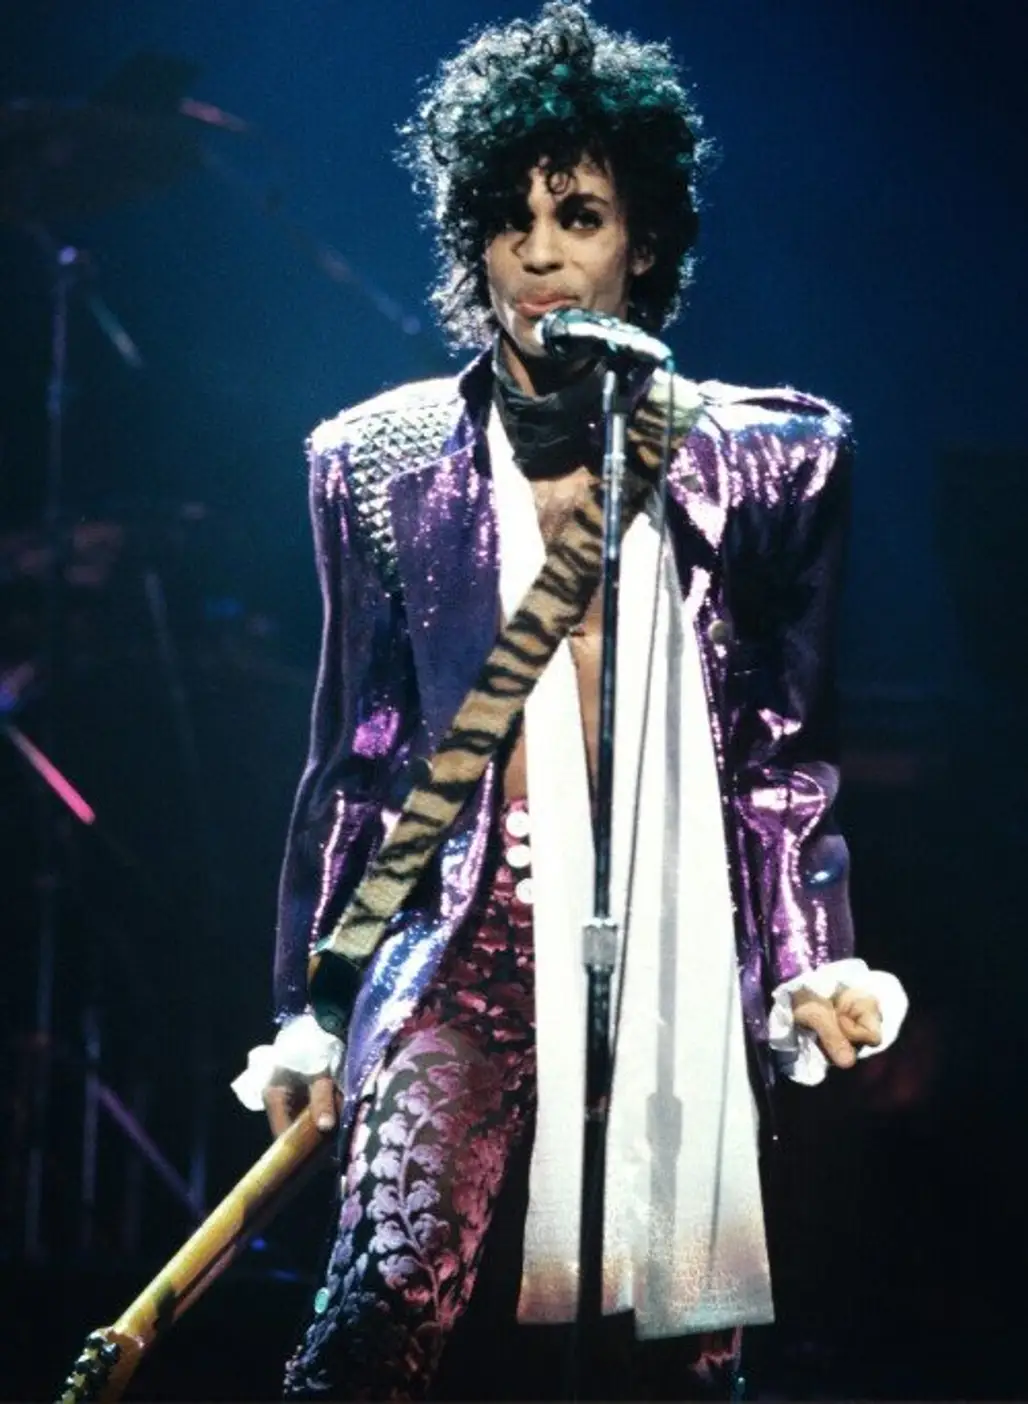 He Sure Loved (and Rocked) Purple!